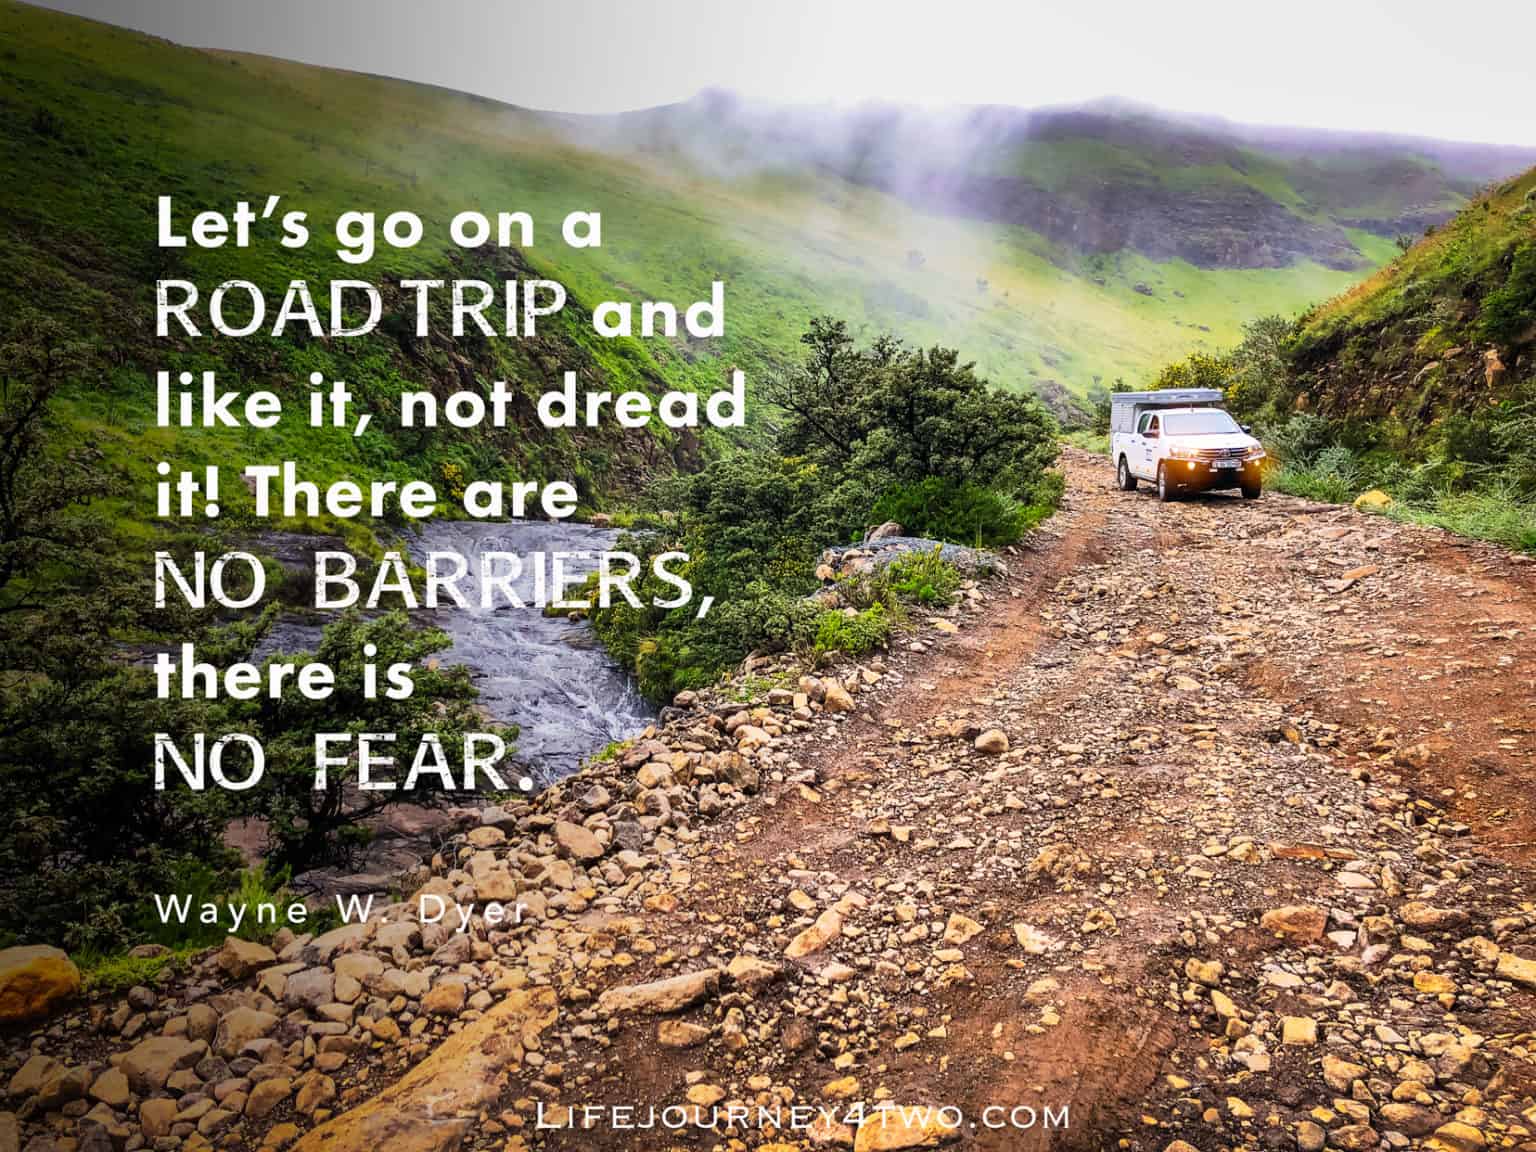 130 Road Trip Quotes (& Images) to Inspire Your Next Adventure.